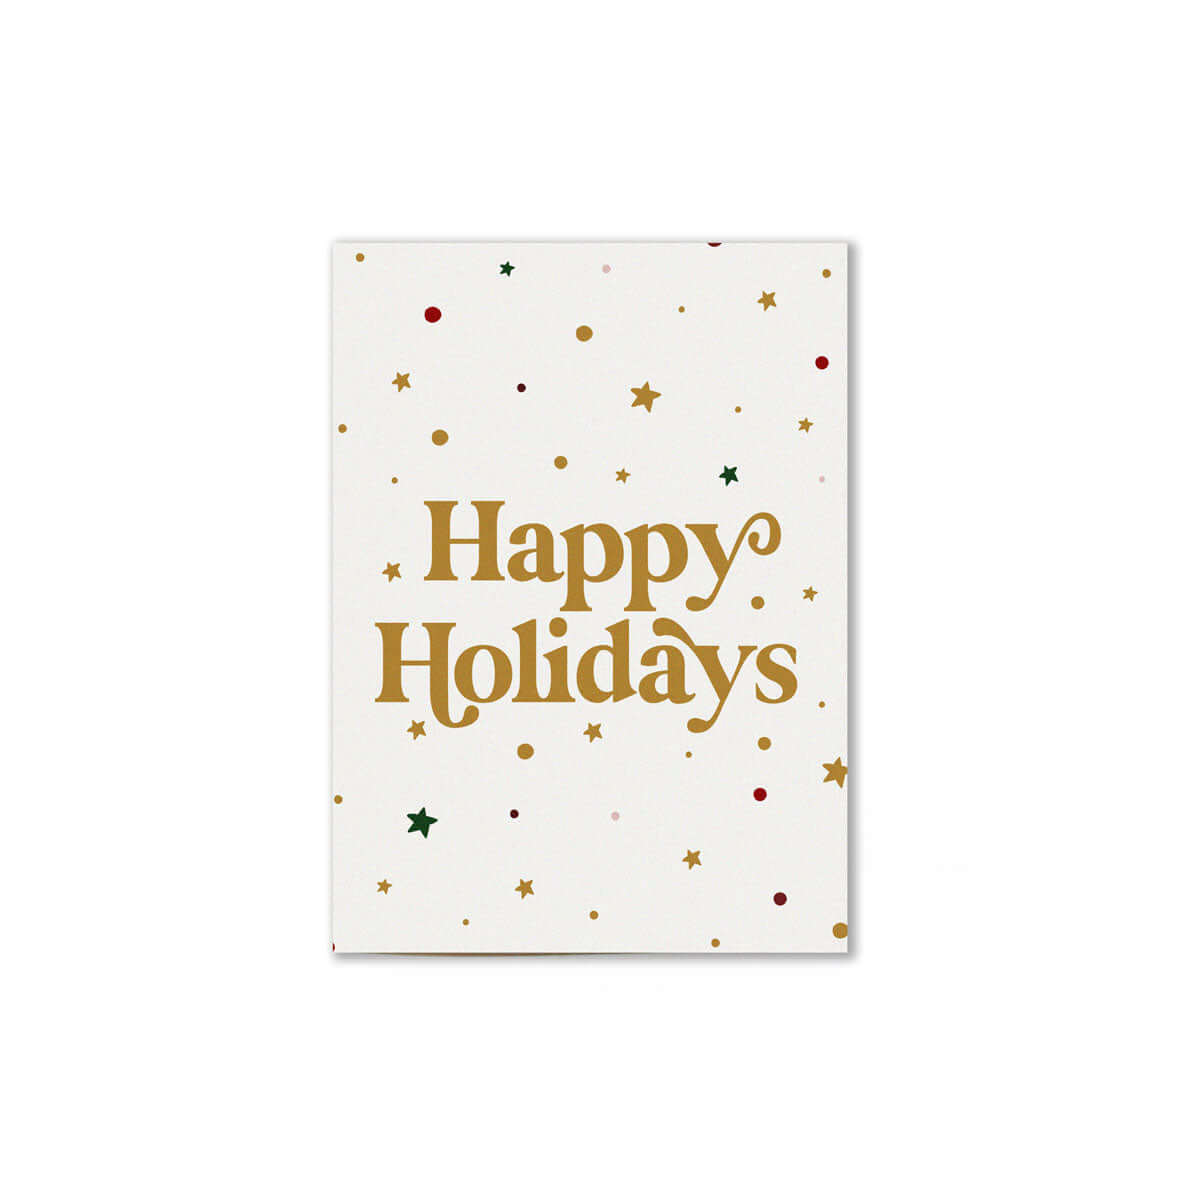 cream colored happy holidays card that reads, "happy holidays" in gold text with gold, green, and maroon star illustrations in the background